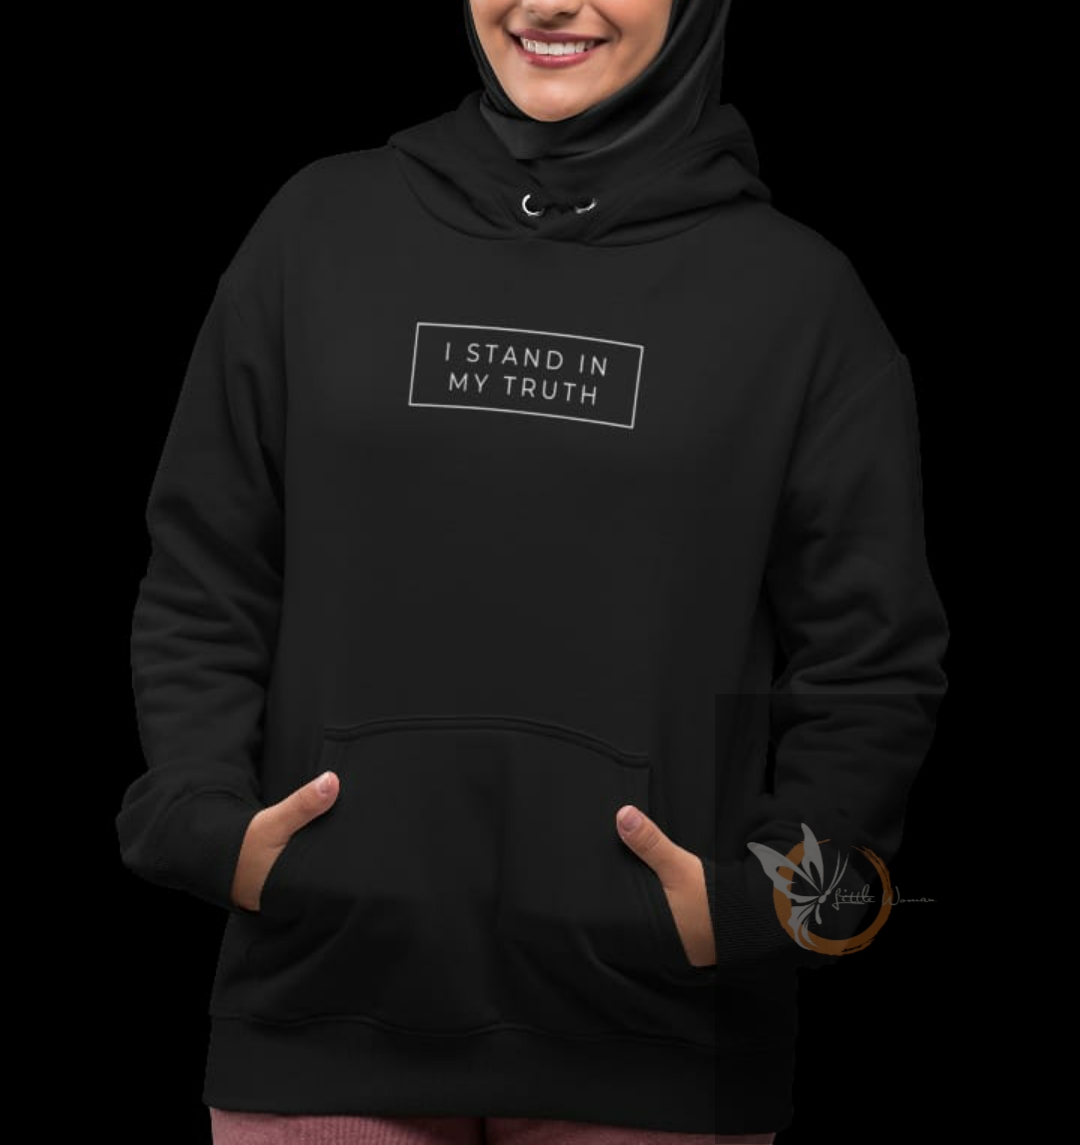 "I stand in my Truth"  Hoodie, also available as Tshirt and Sweatshirt